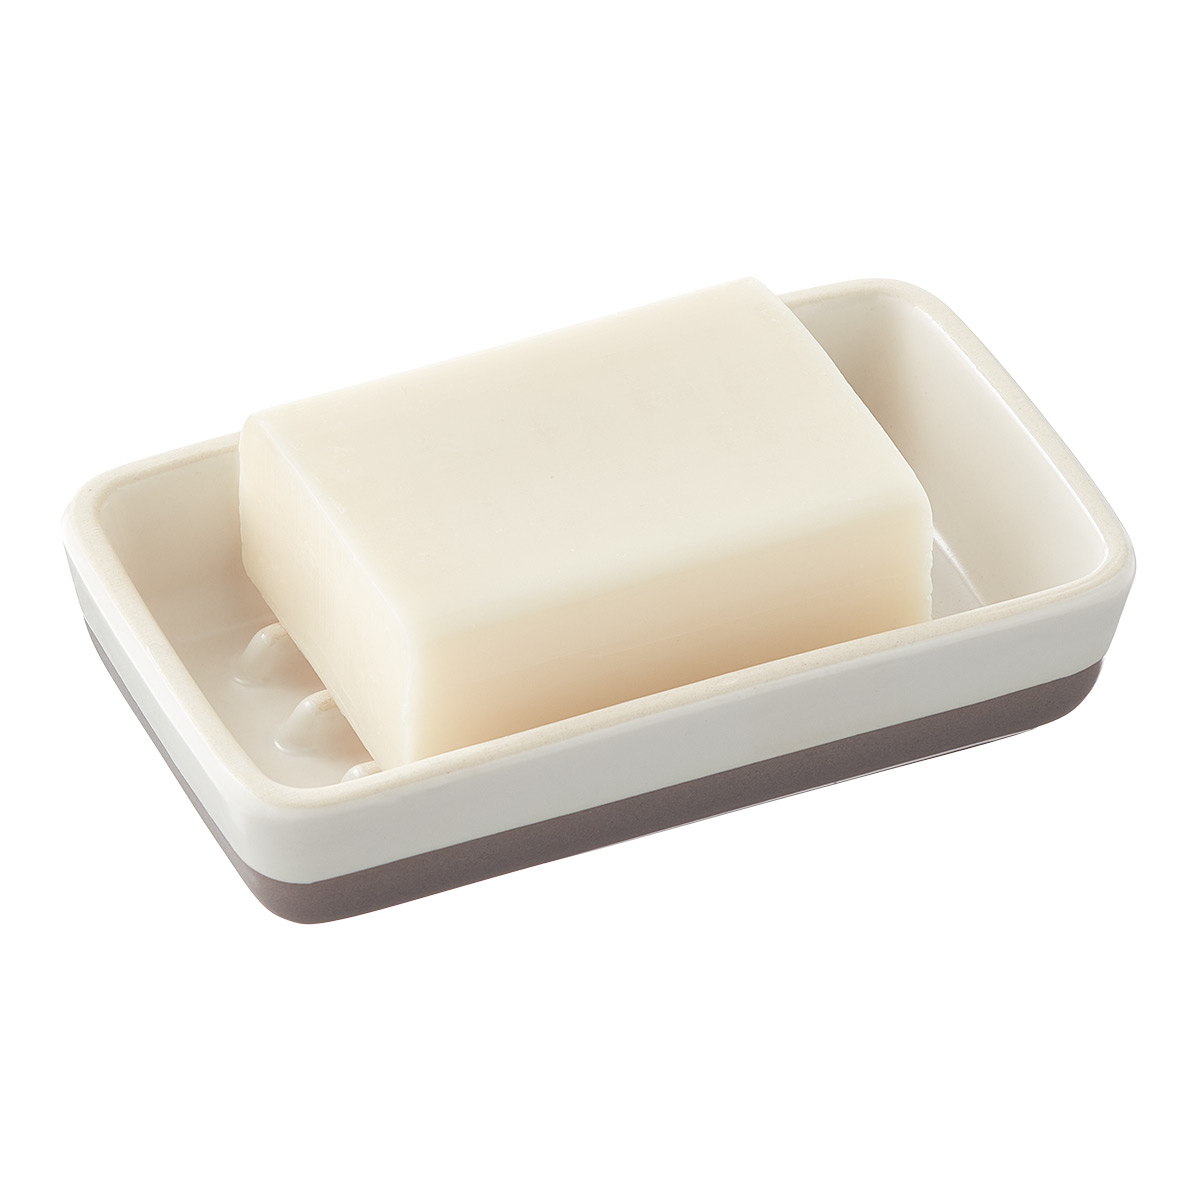 https://www.containerstore.com/catalogimages/446314/10089572_Raise_The_Bar_Soap_Dish_V2.jpg